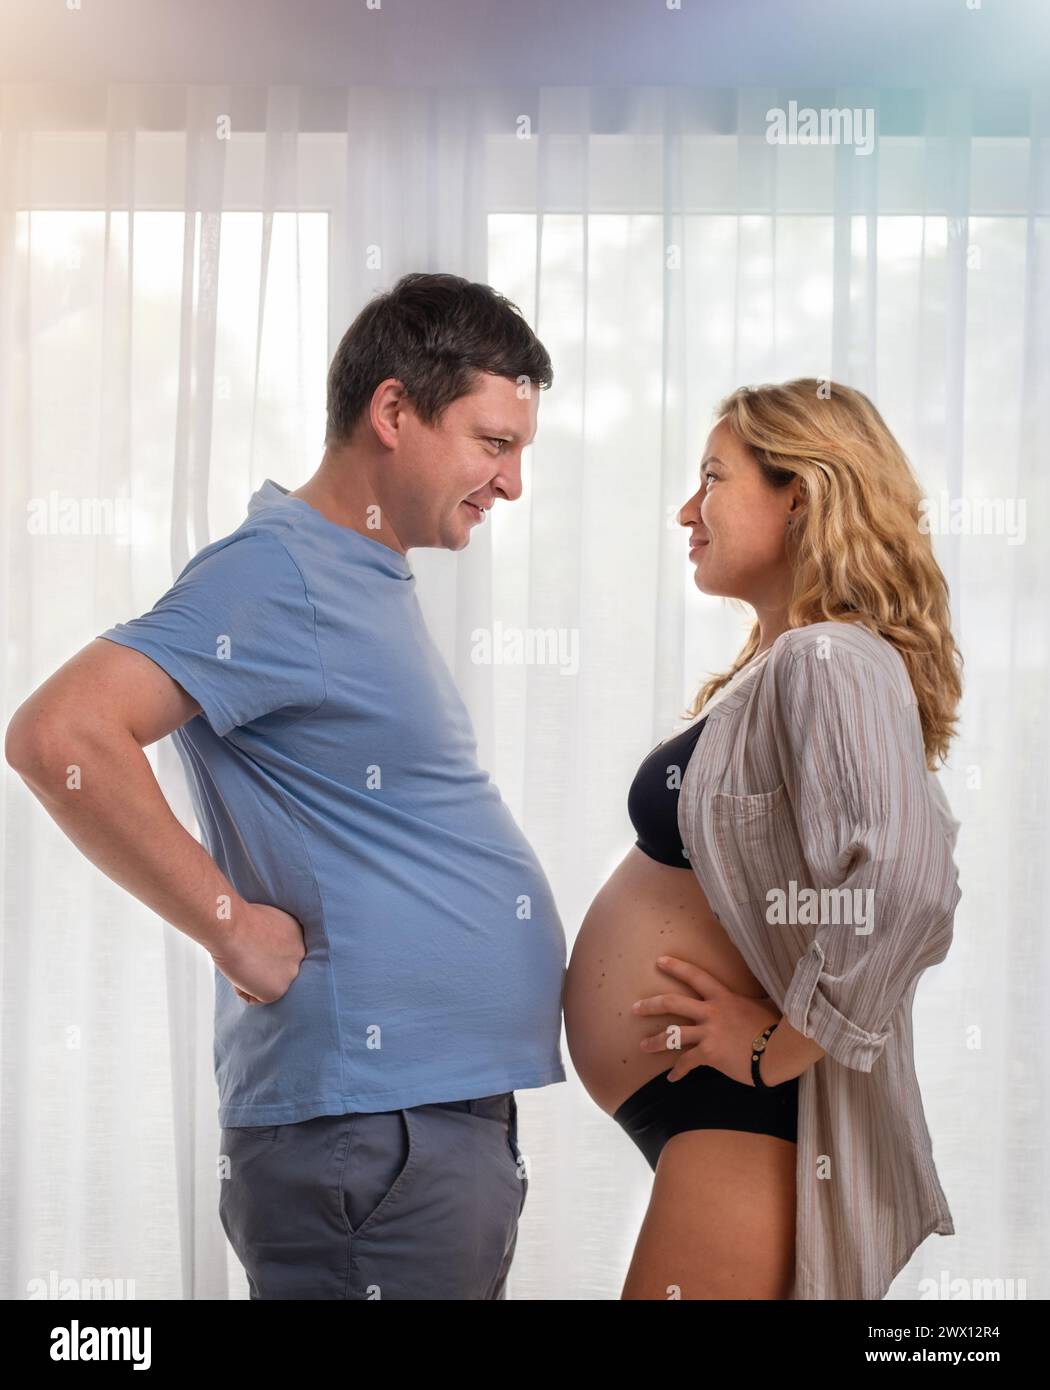 A pregnant girl and her husband measure their bellies near the window Stock Photo